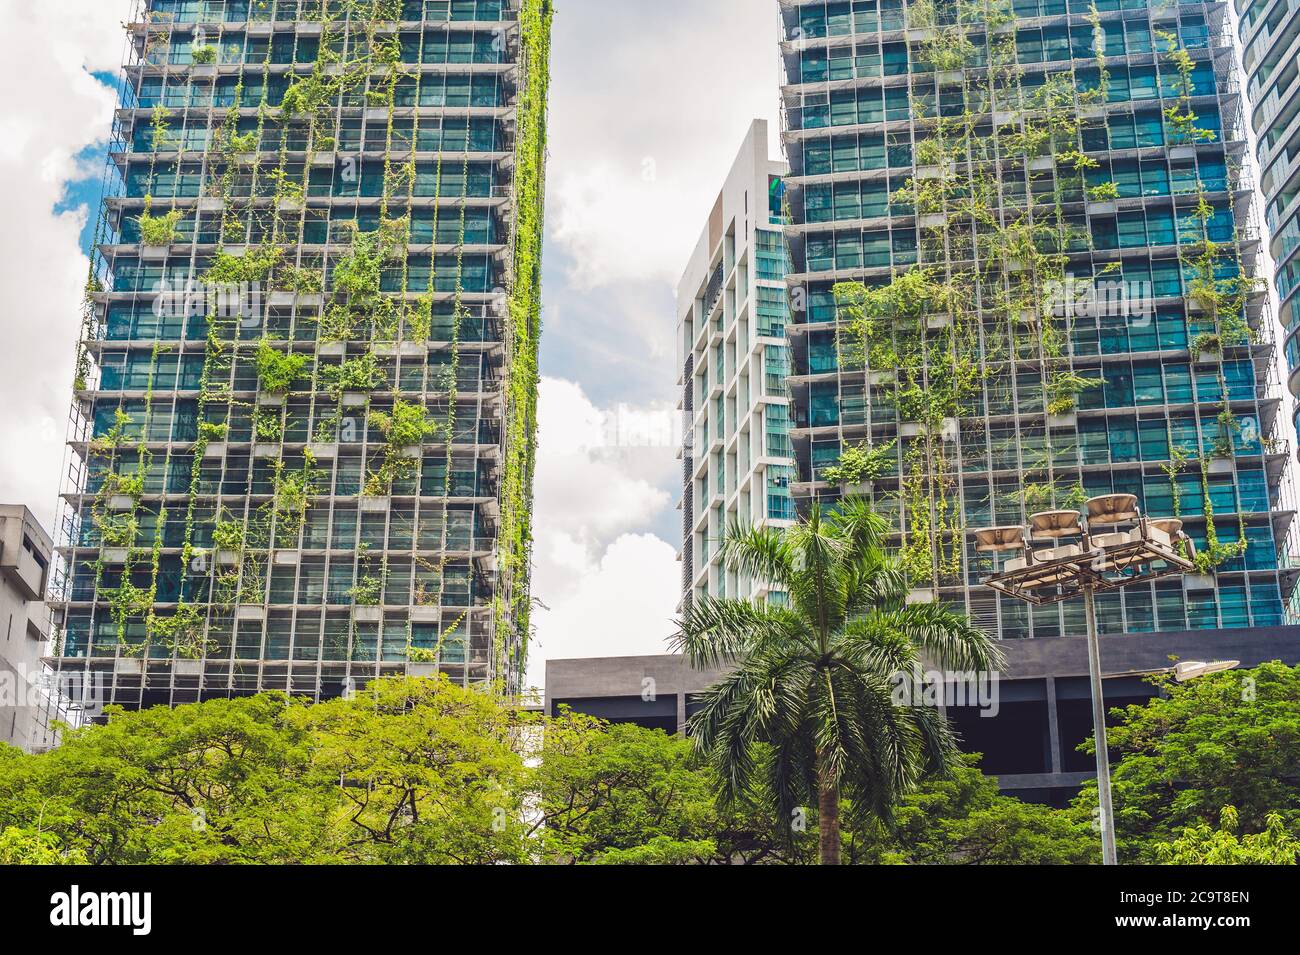 KUALA LUMPUR, MALAYSIA - 24 FEBRUARY 2017: Eco architecture. Green skyscraper building with plants growing on the facade. Ecology and green living in Stock Photo